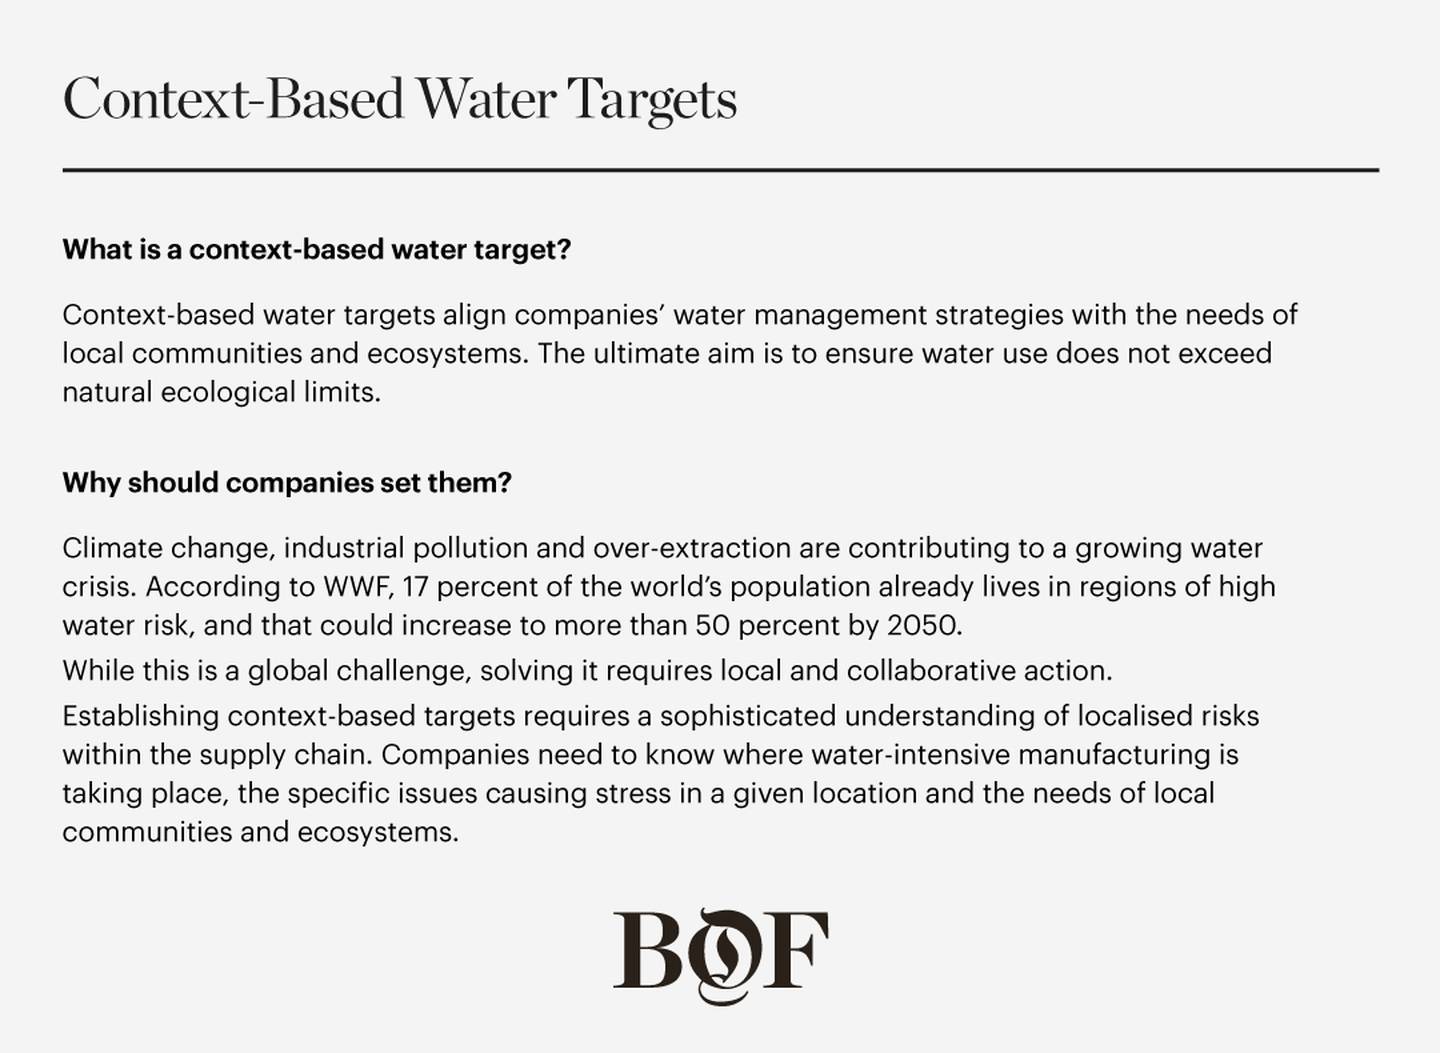 Context-based water targets